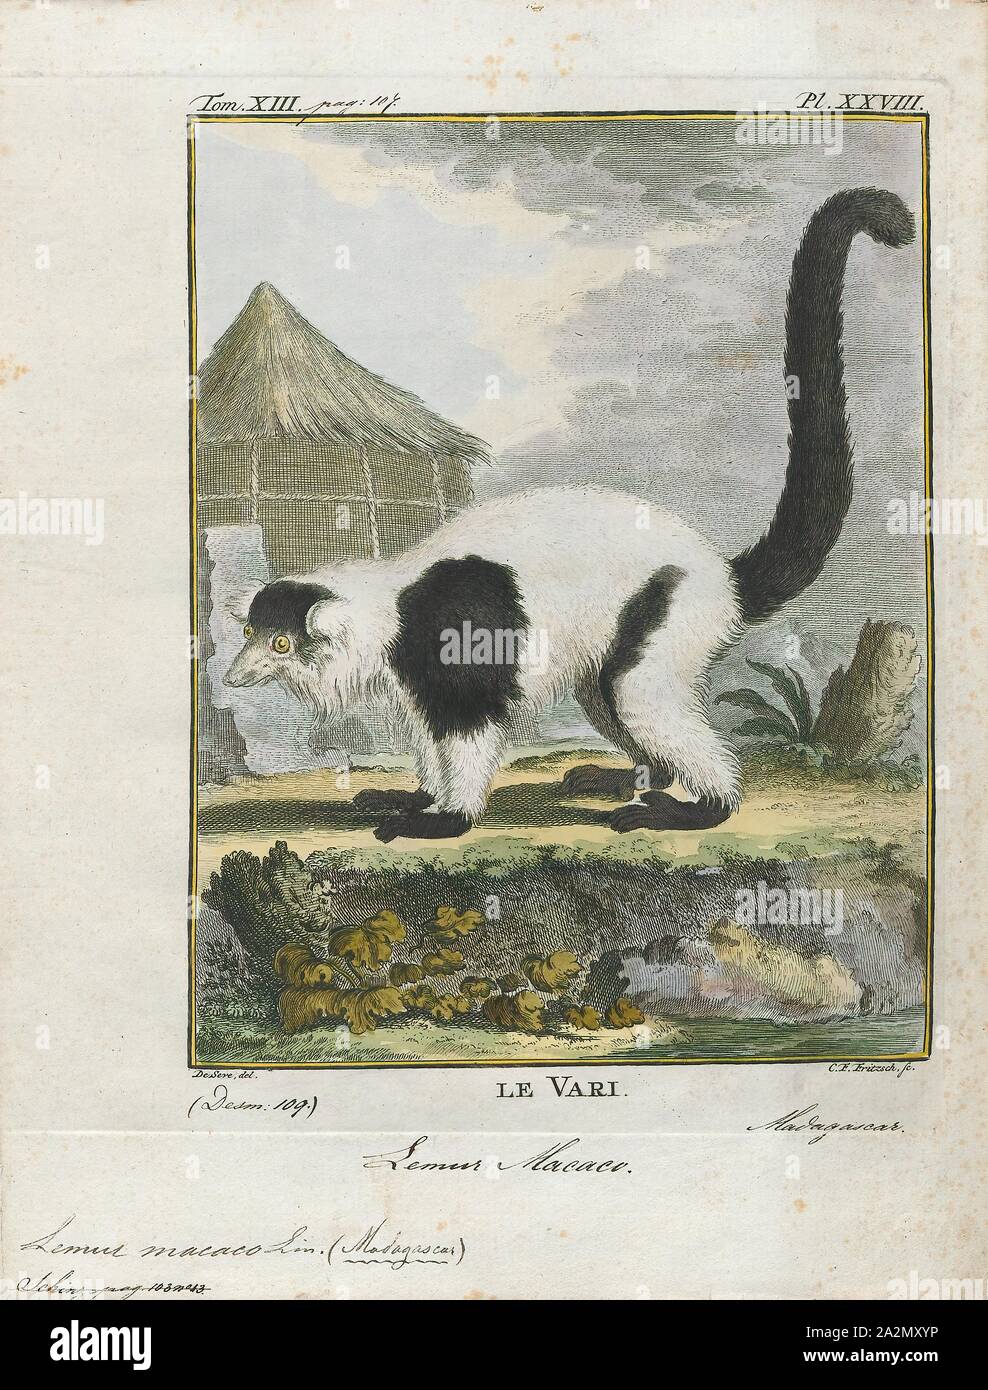 Lemur macaco, Print, Lemurs (from Latin lemures – ghosts or spirits) are mammals of the order Primates, divided into 8 families and consisting of 15 genera and around 100 existing species. They are native only to the island of Madagascar. Most existing lemurs are small, have a pointed snout, large eyes, and a long tail. They chiefly live in trees (arboreal), and are active at night (nocturnal)., 1782 Stock Photo